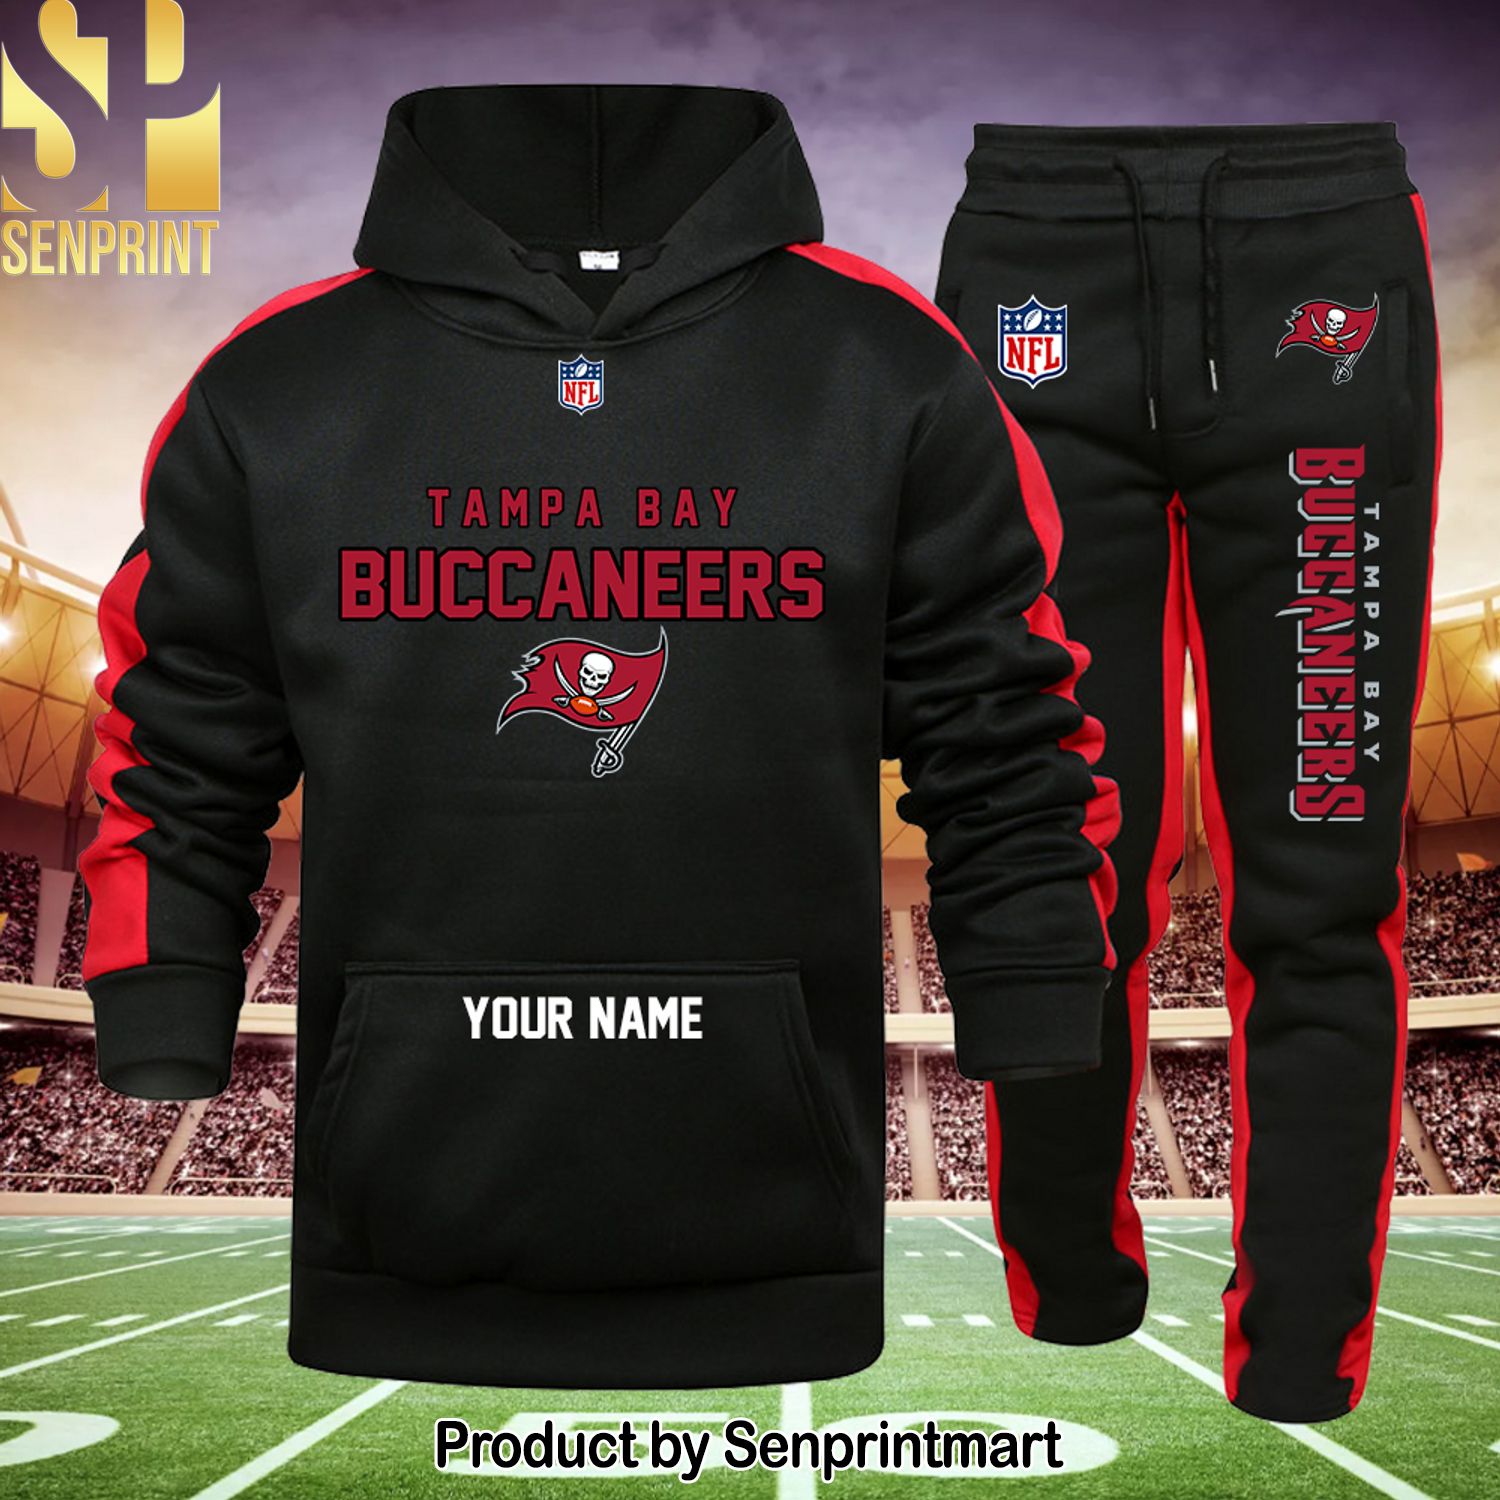 NFL Tampa Bay Buccaneers New Version Shirt and Sweatpants